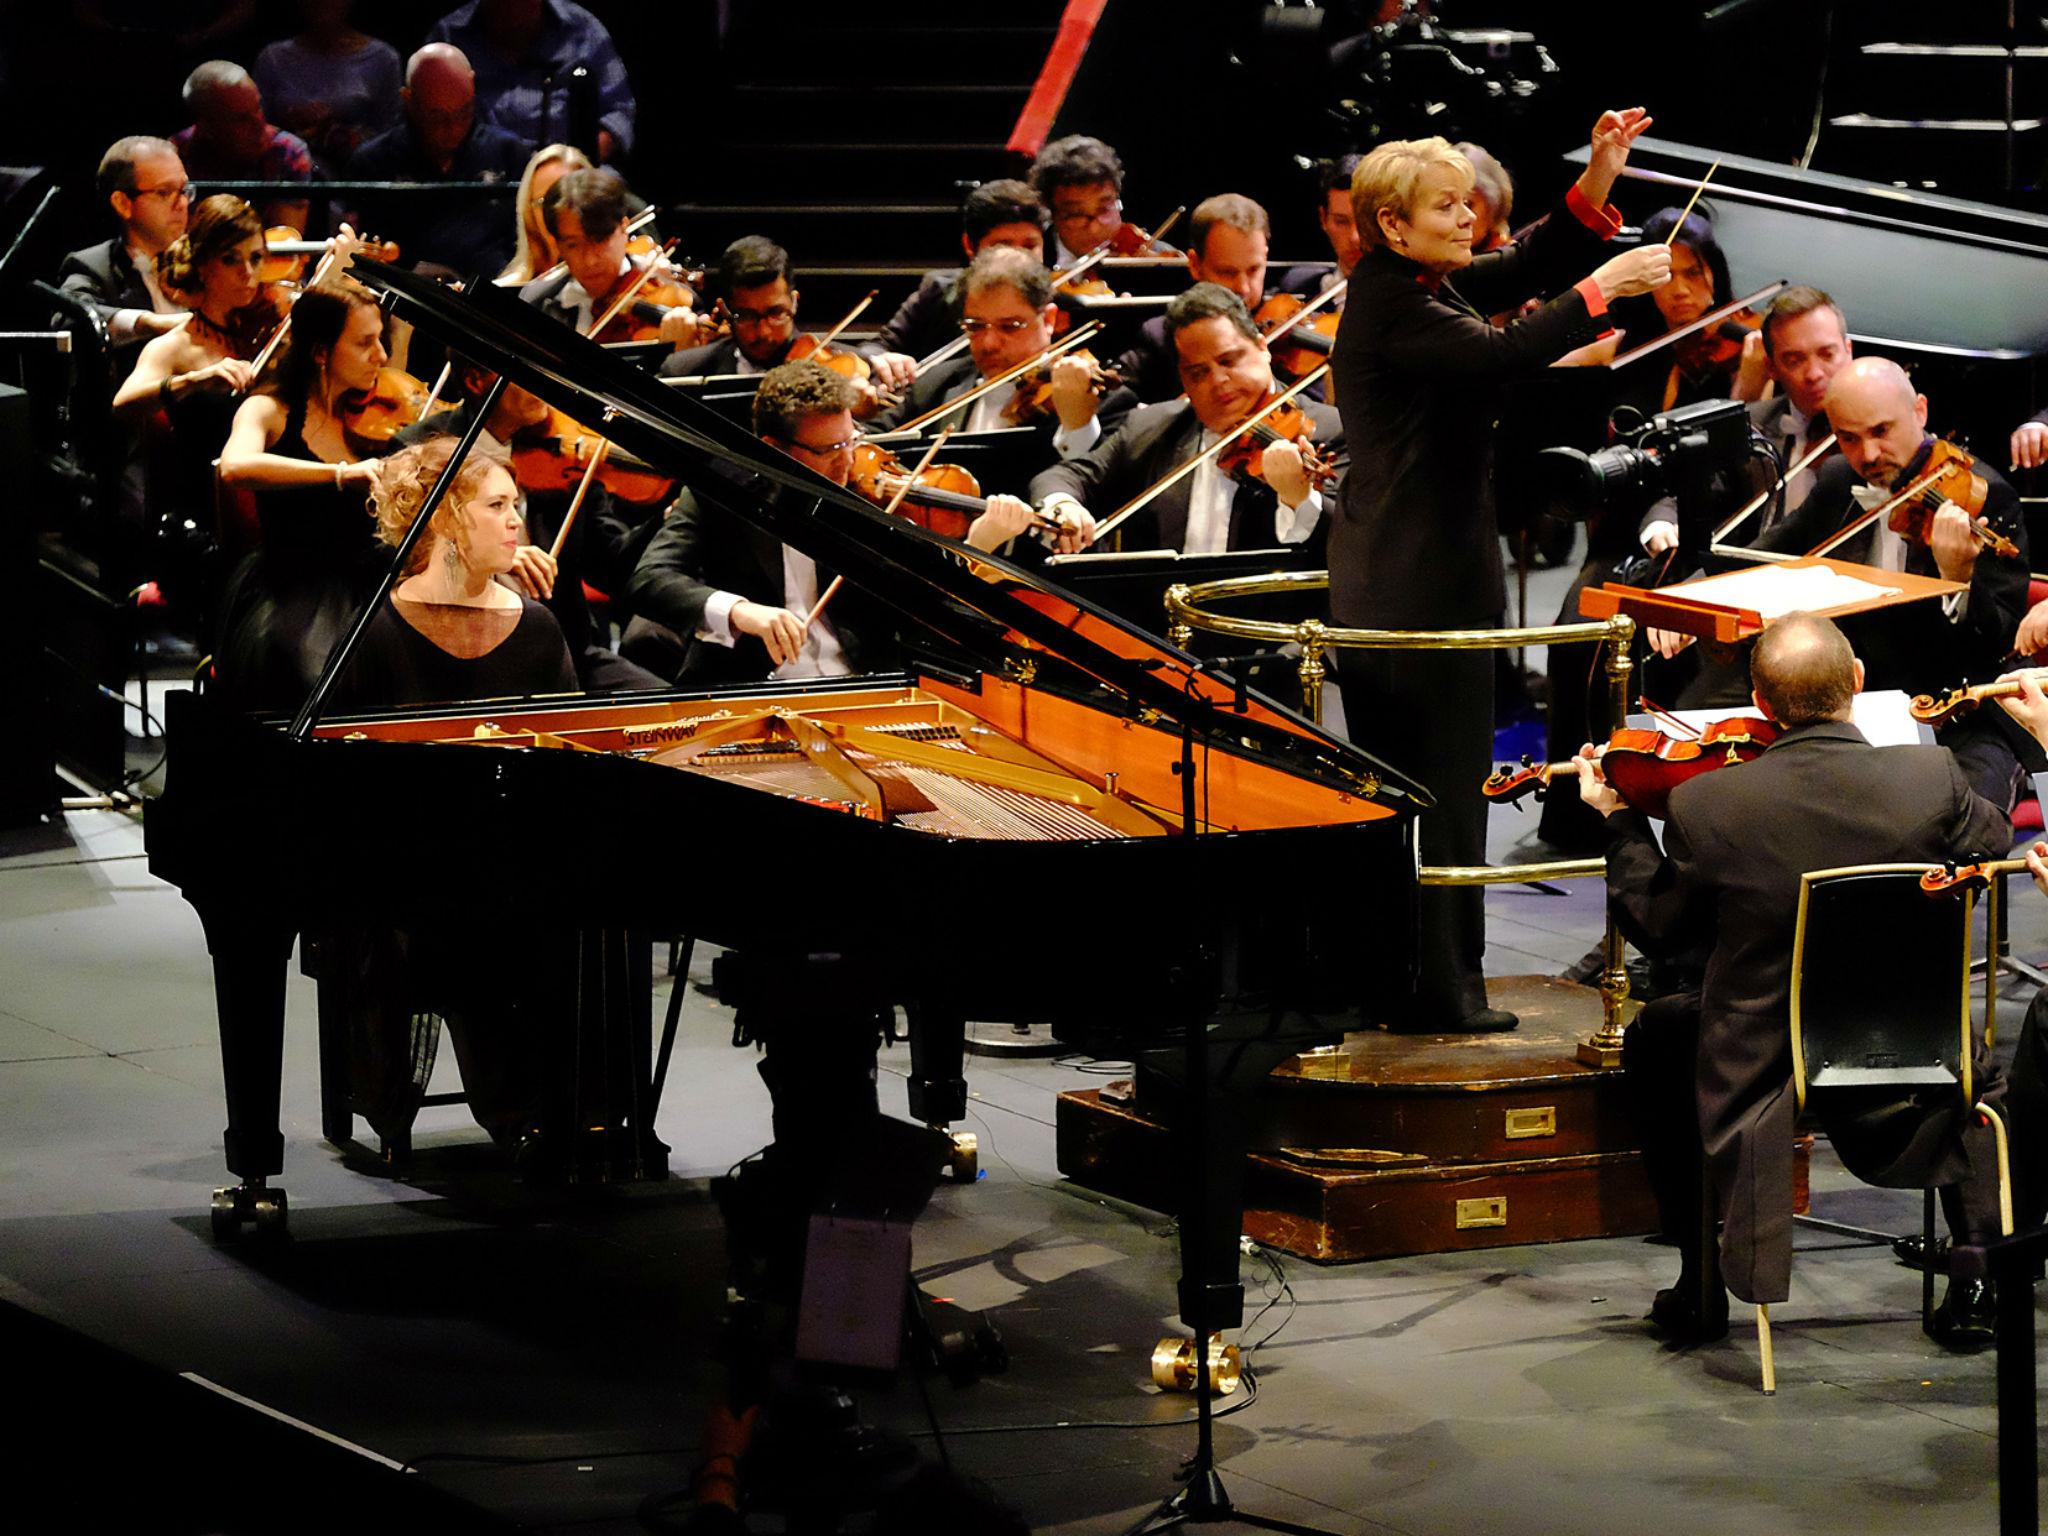 Pianist Gabriela Montero performs Grieg’s Piano Concerto in A Minor with the São Paulo Symphony Orchestra conducted by Marin Alsop at the BBC Proms 2016